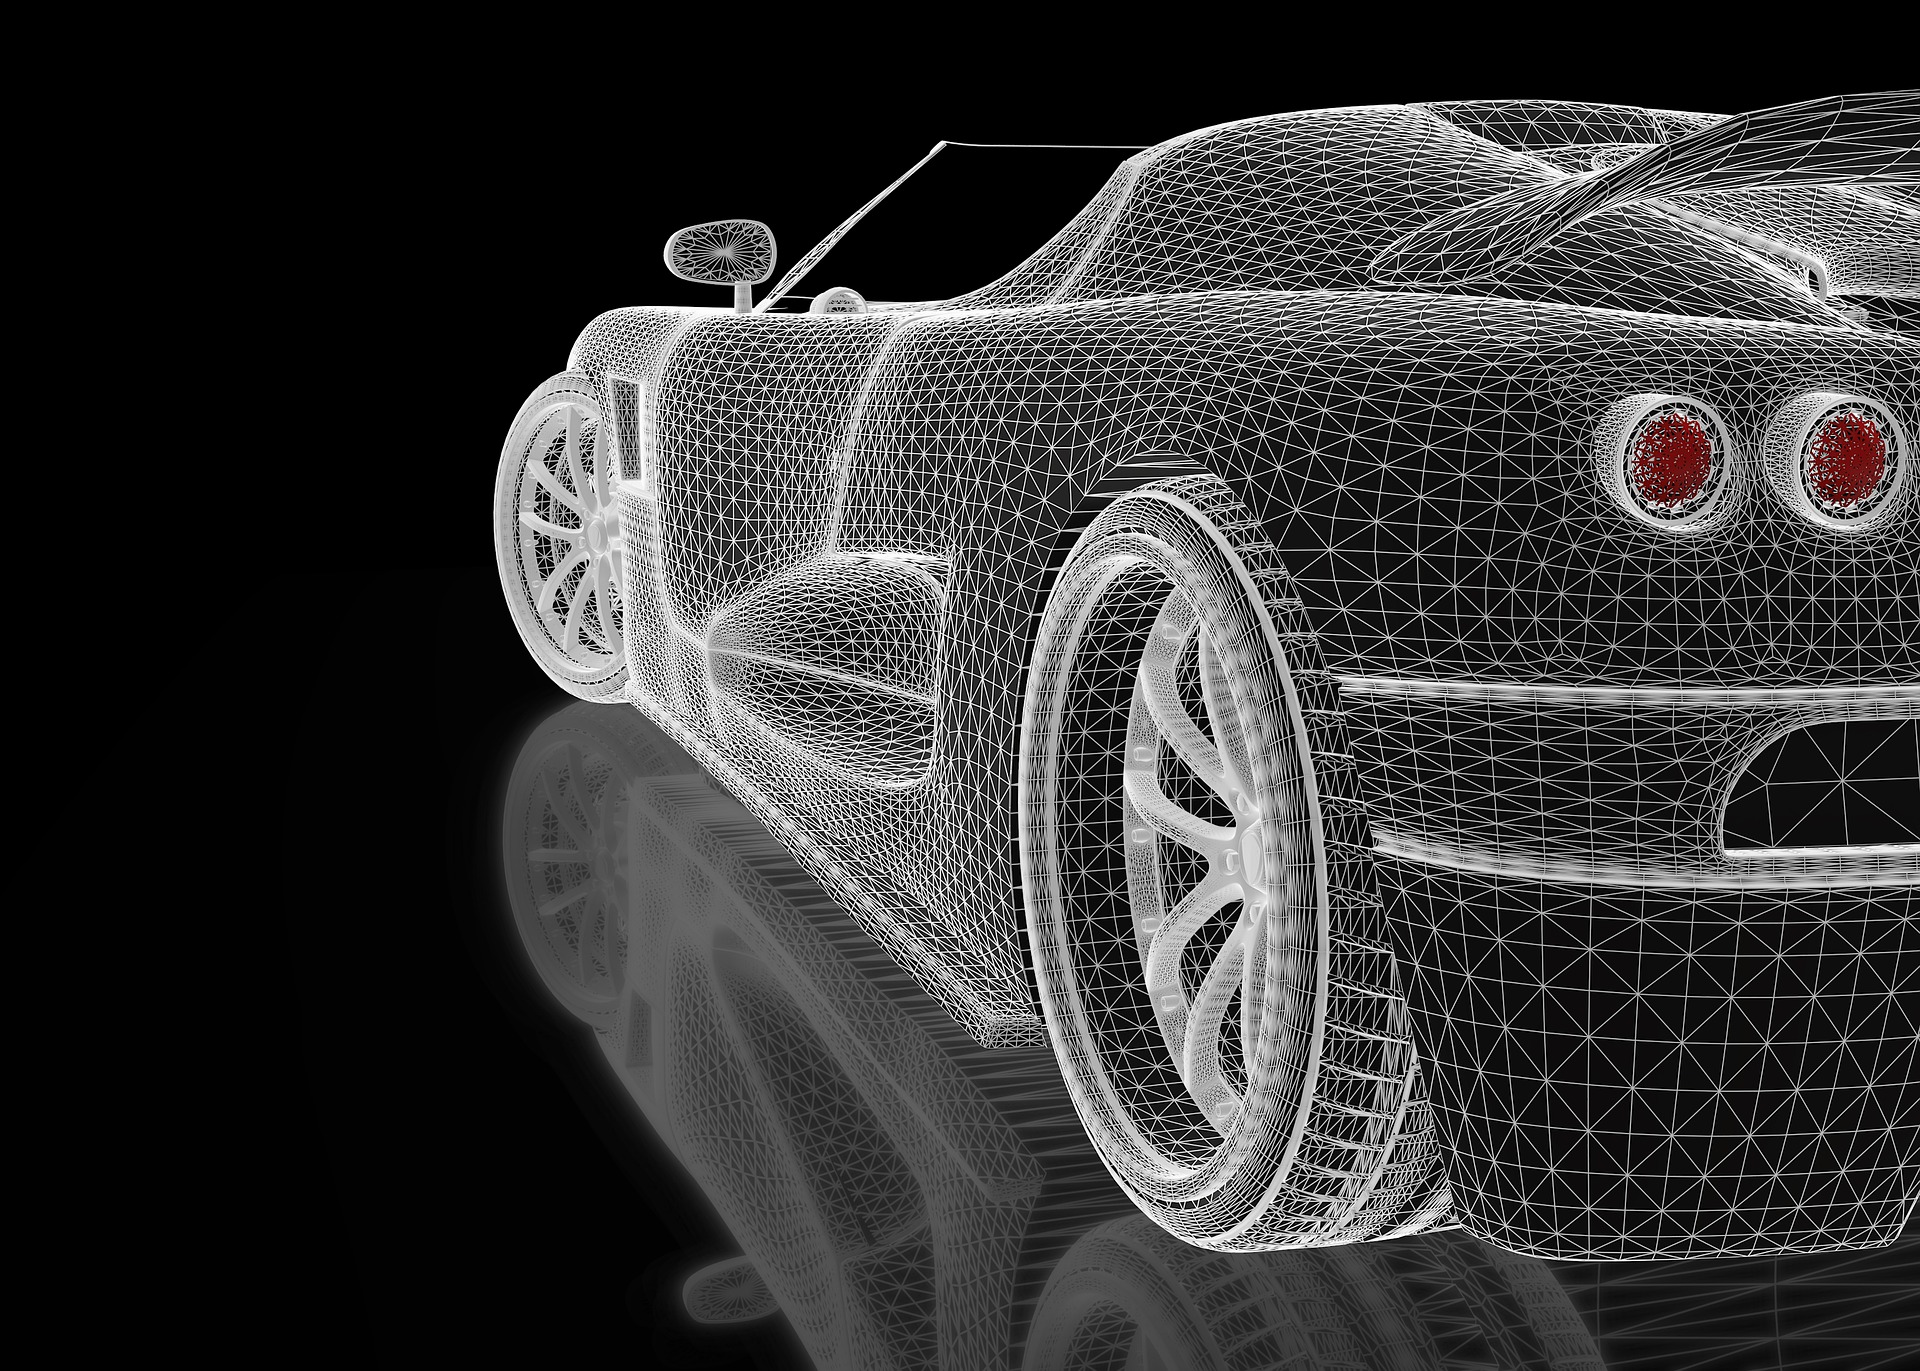 The Graphene Flagship’s multidisciplinary team has already demonstrated the potential of integrating graphene and layered materials into composites for vehicles to make them lighter.